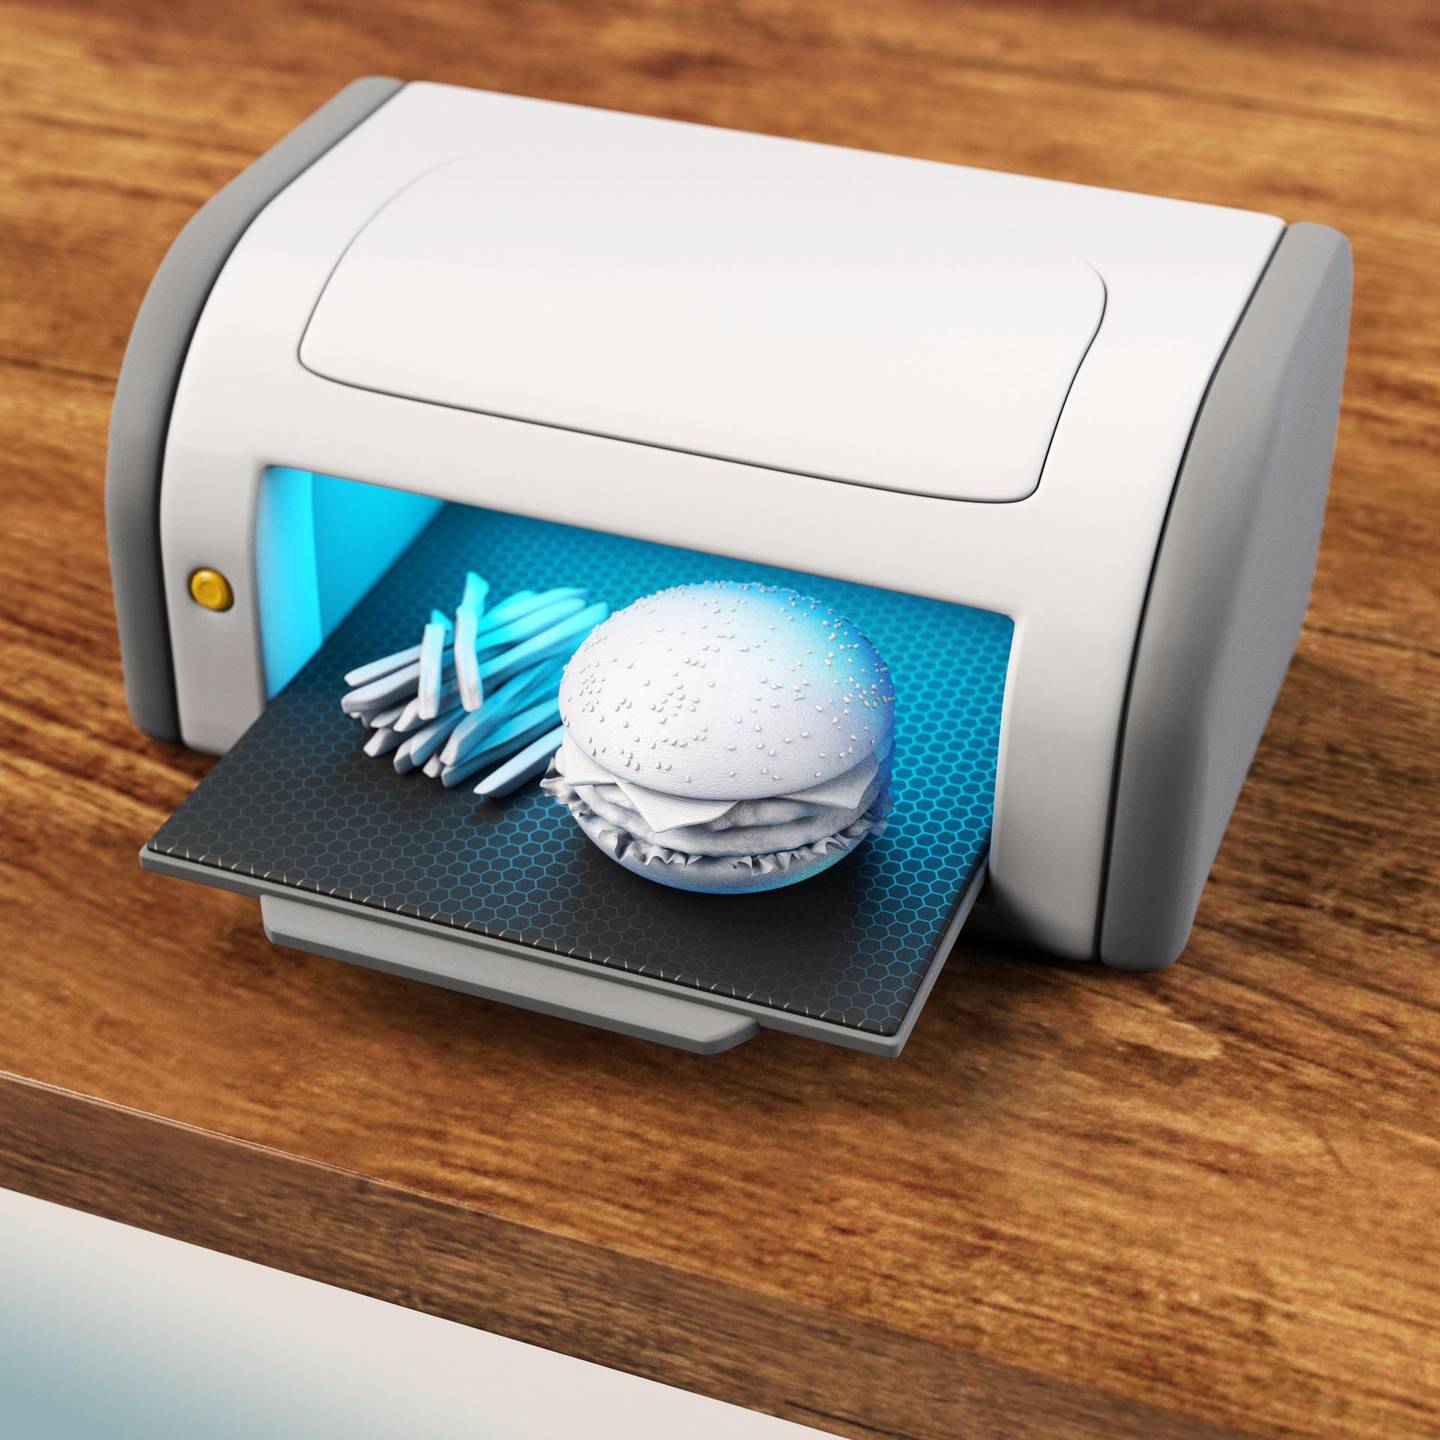 Futuristic illustration of artificial burger and french fires created using a 3D printer.